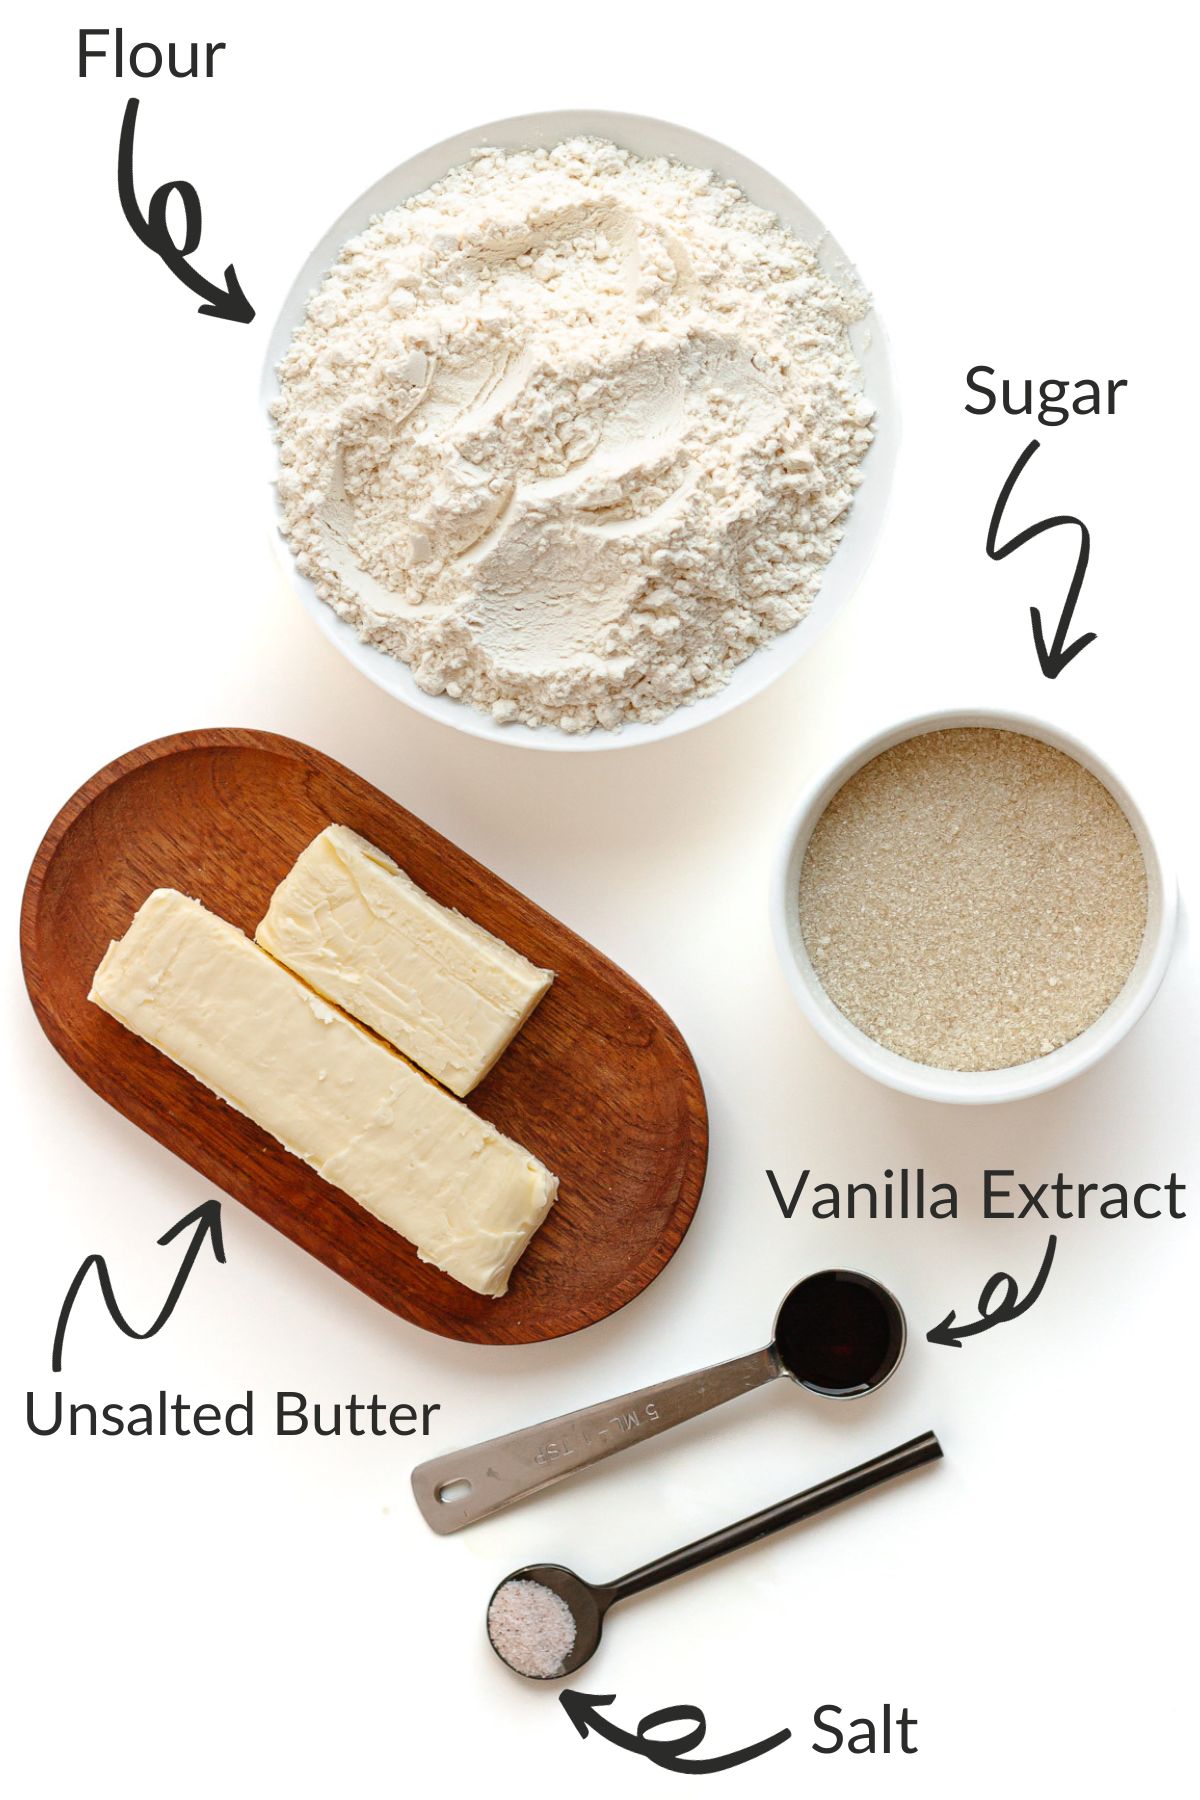 Labelled photo of ingredients needed to make butter streusel.